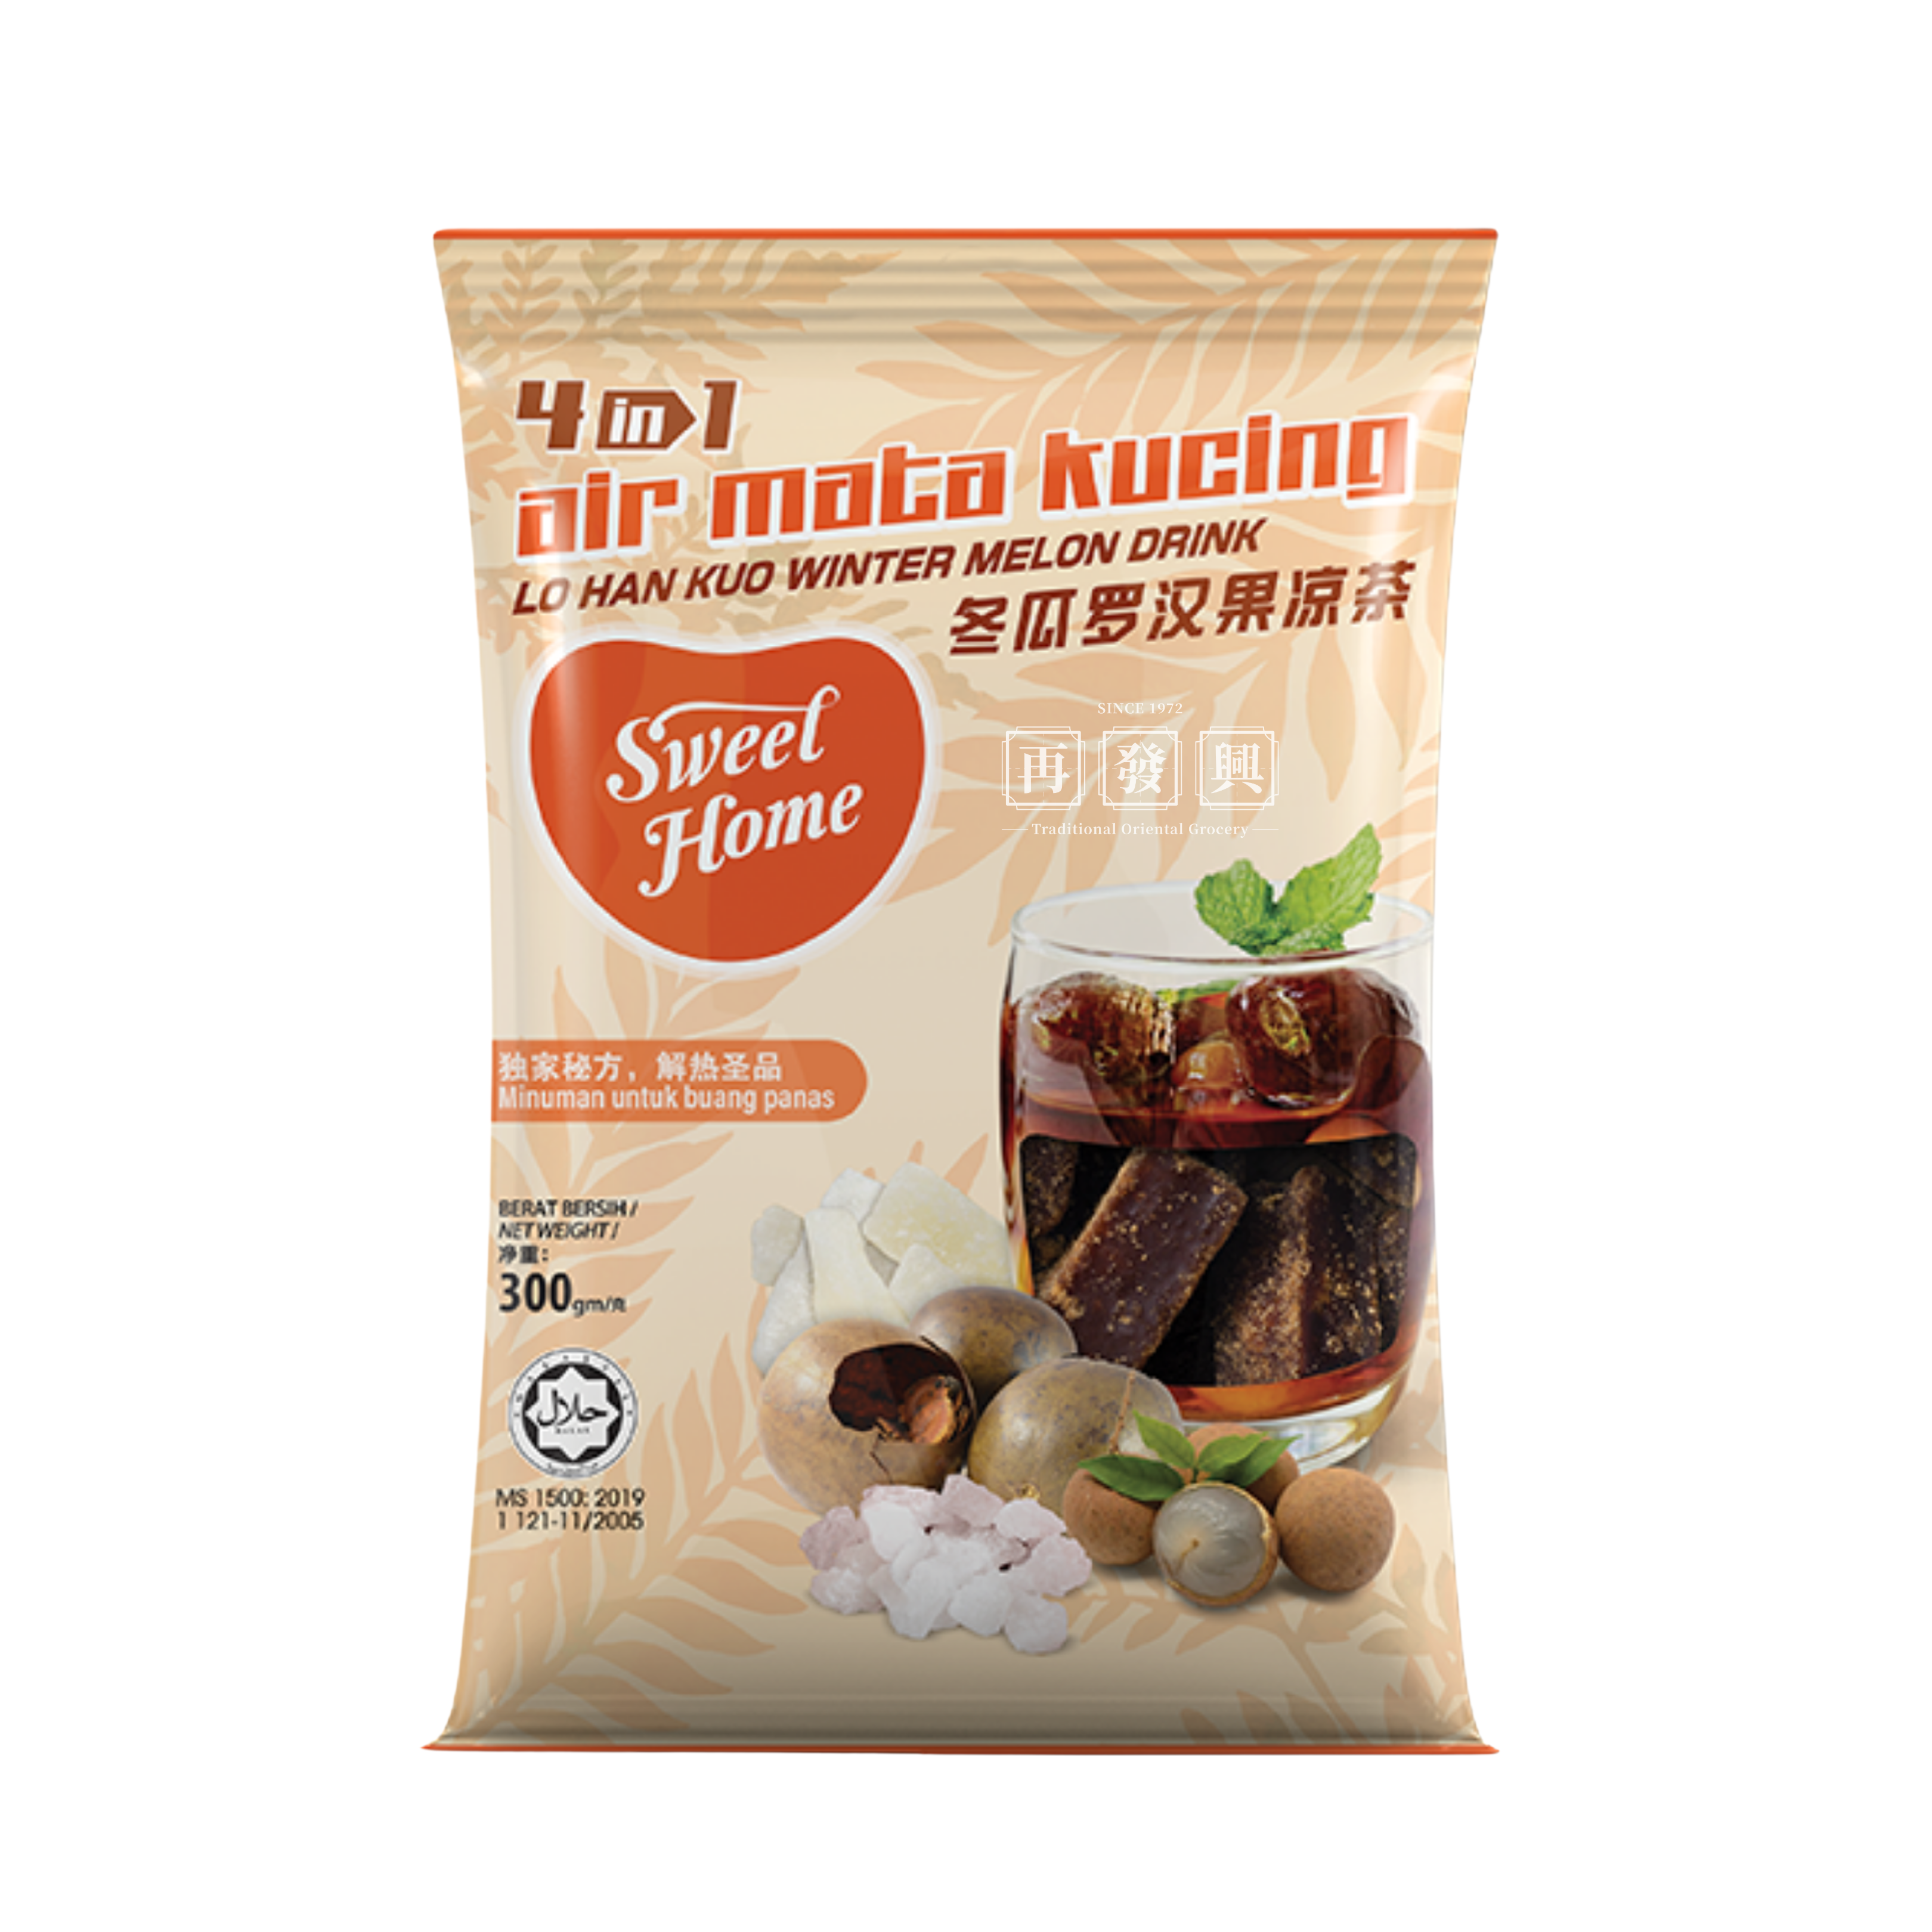 Sweet Home 4in1 Luo Han Guo Winter Melon Drink 300g